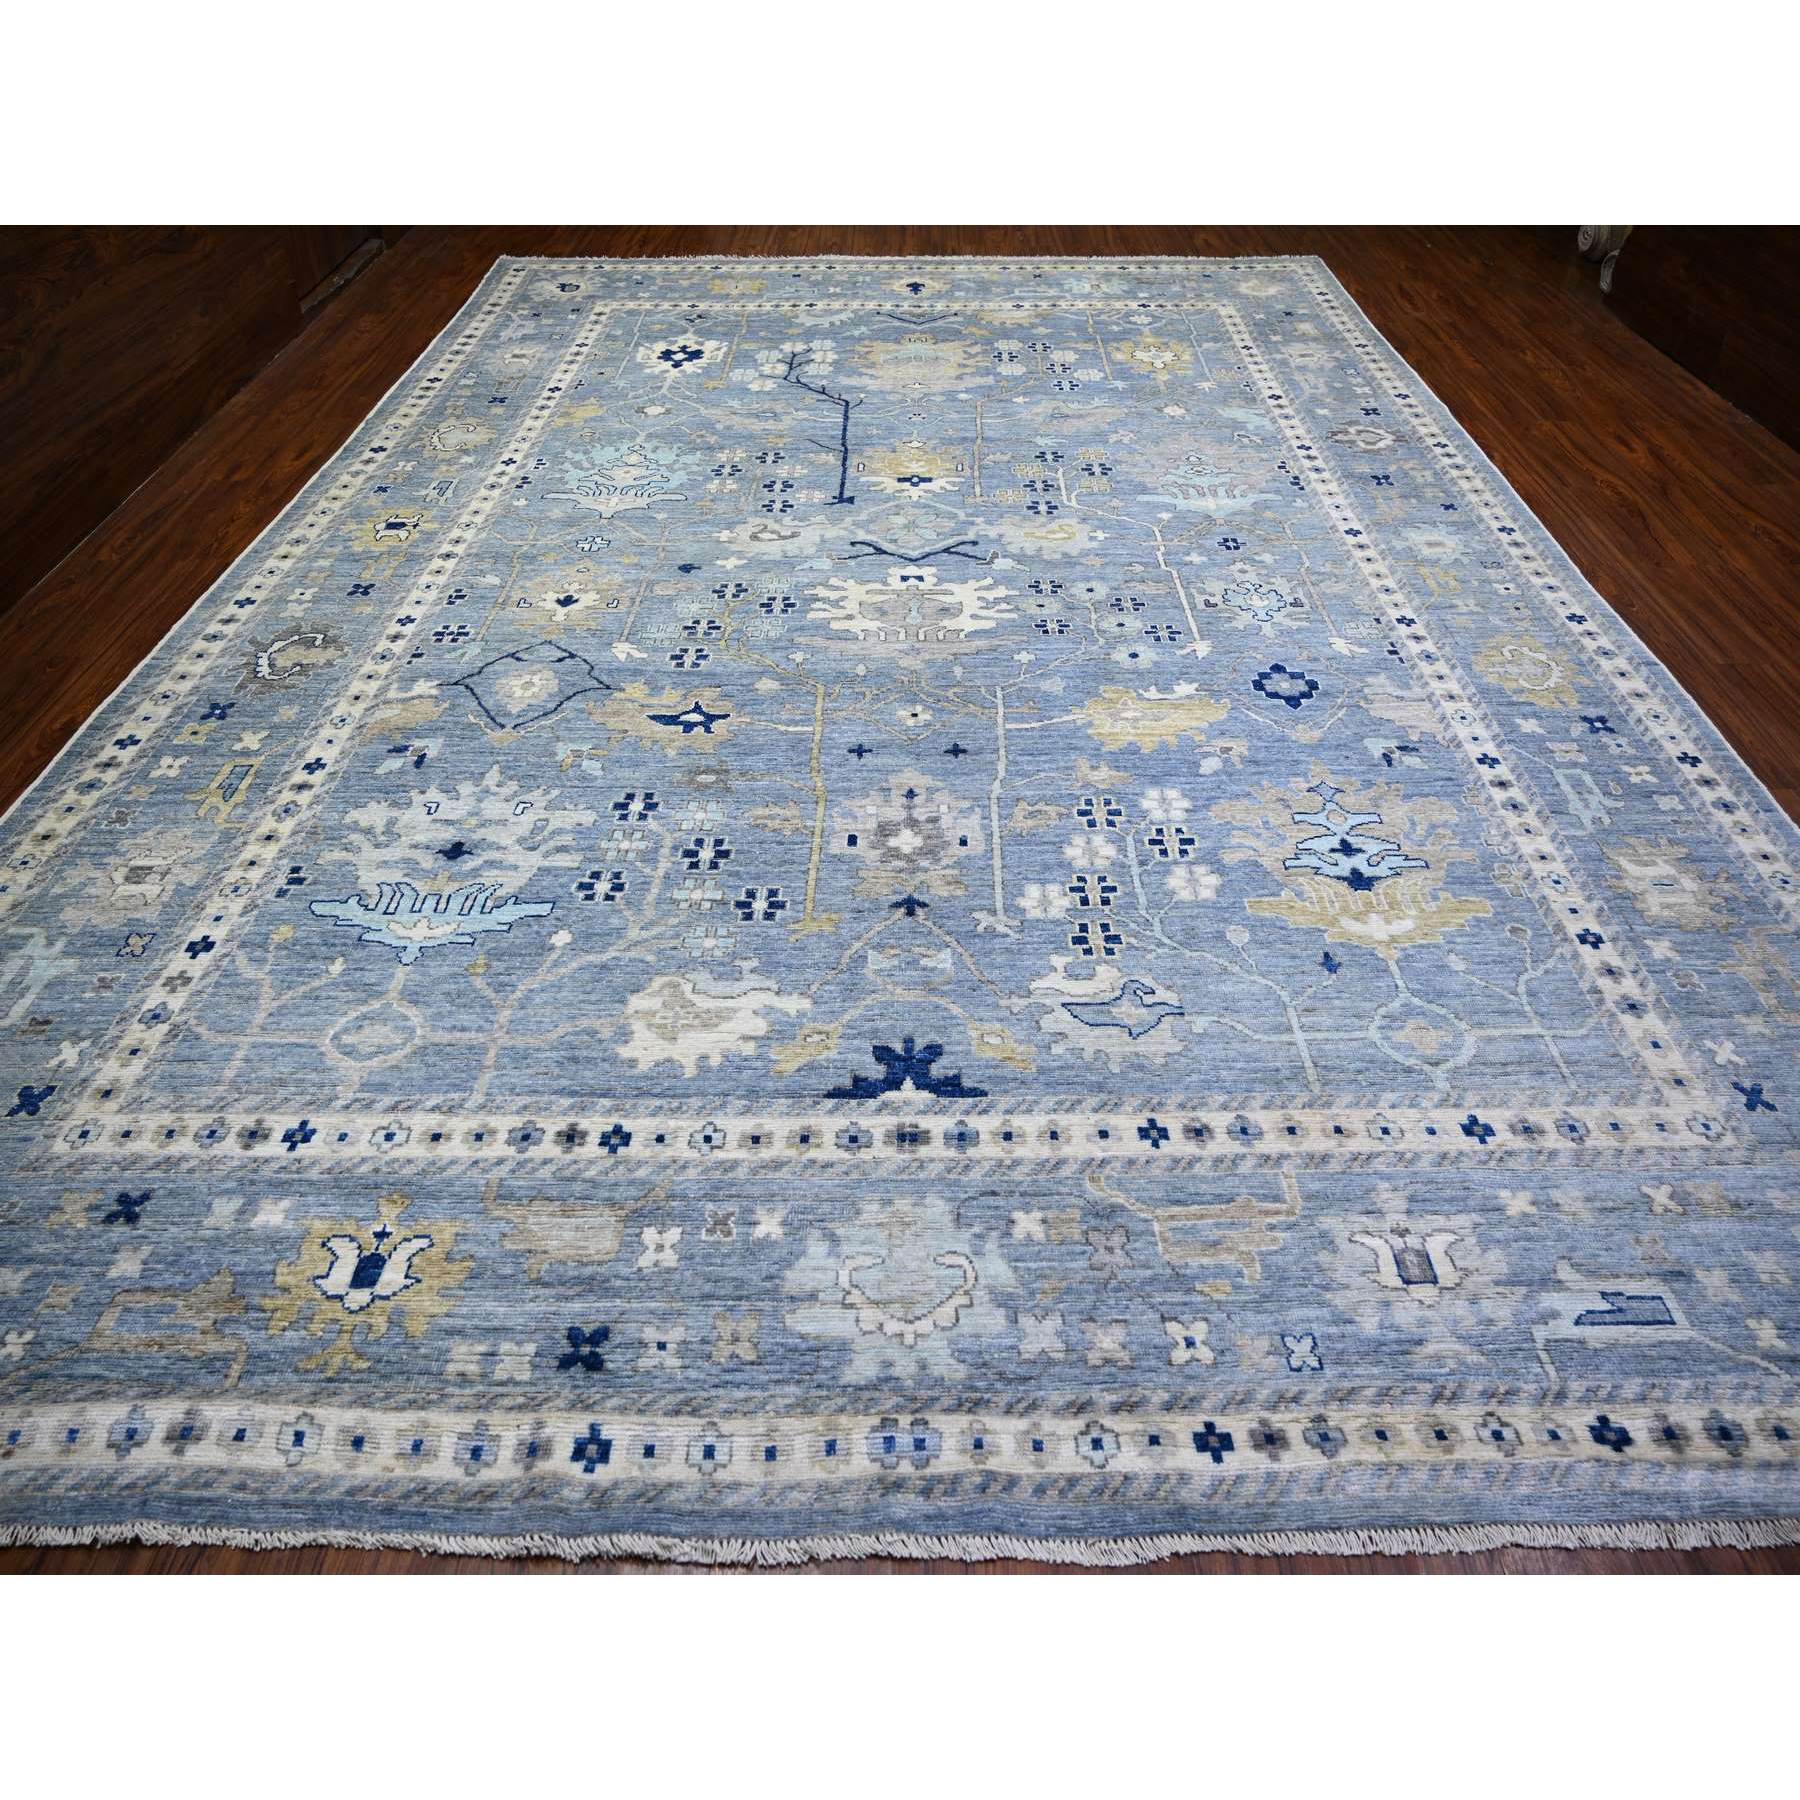 11'7"x15'9" Air Force Blue, Natural Dyes Afghan Angora Oushak with All Over Vines, Pure Wool Hand Woven, Oversized Oriental Rug 